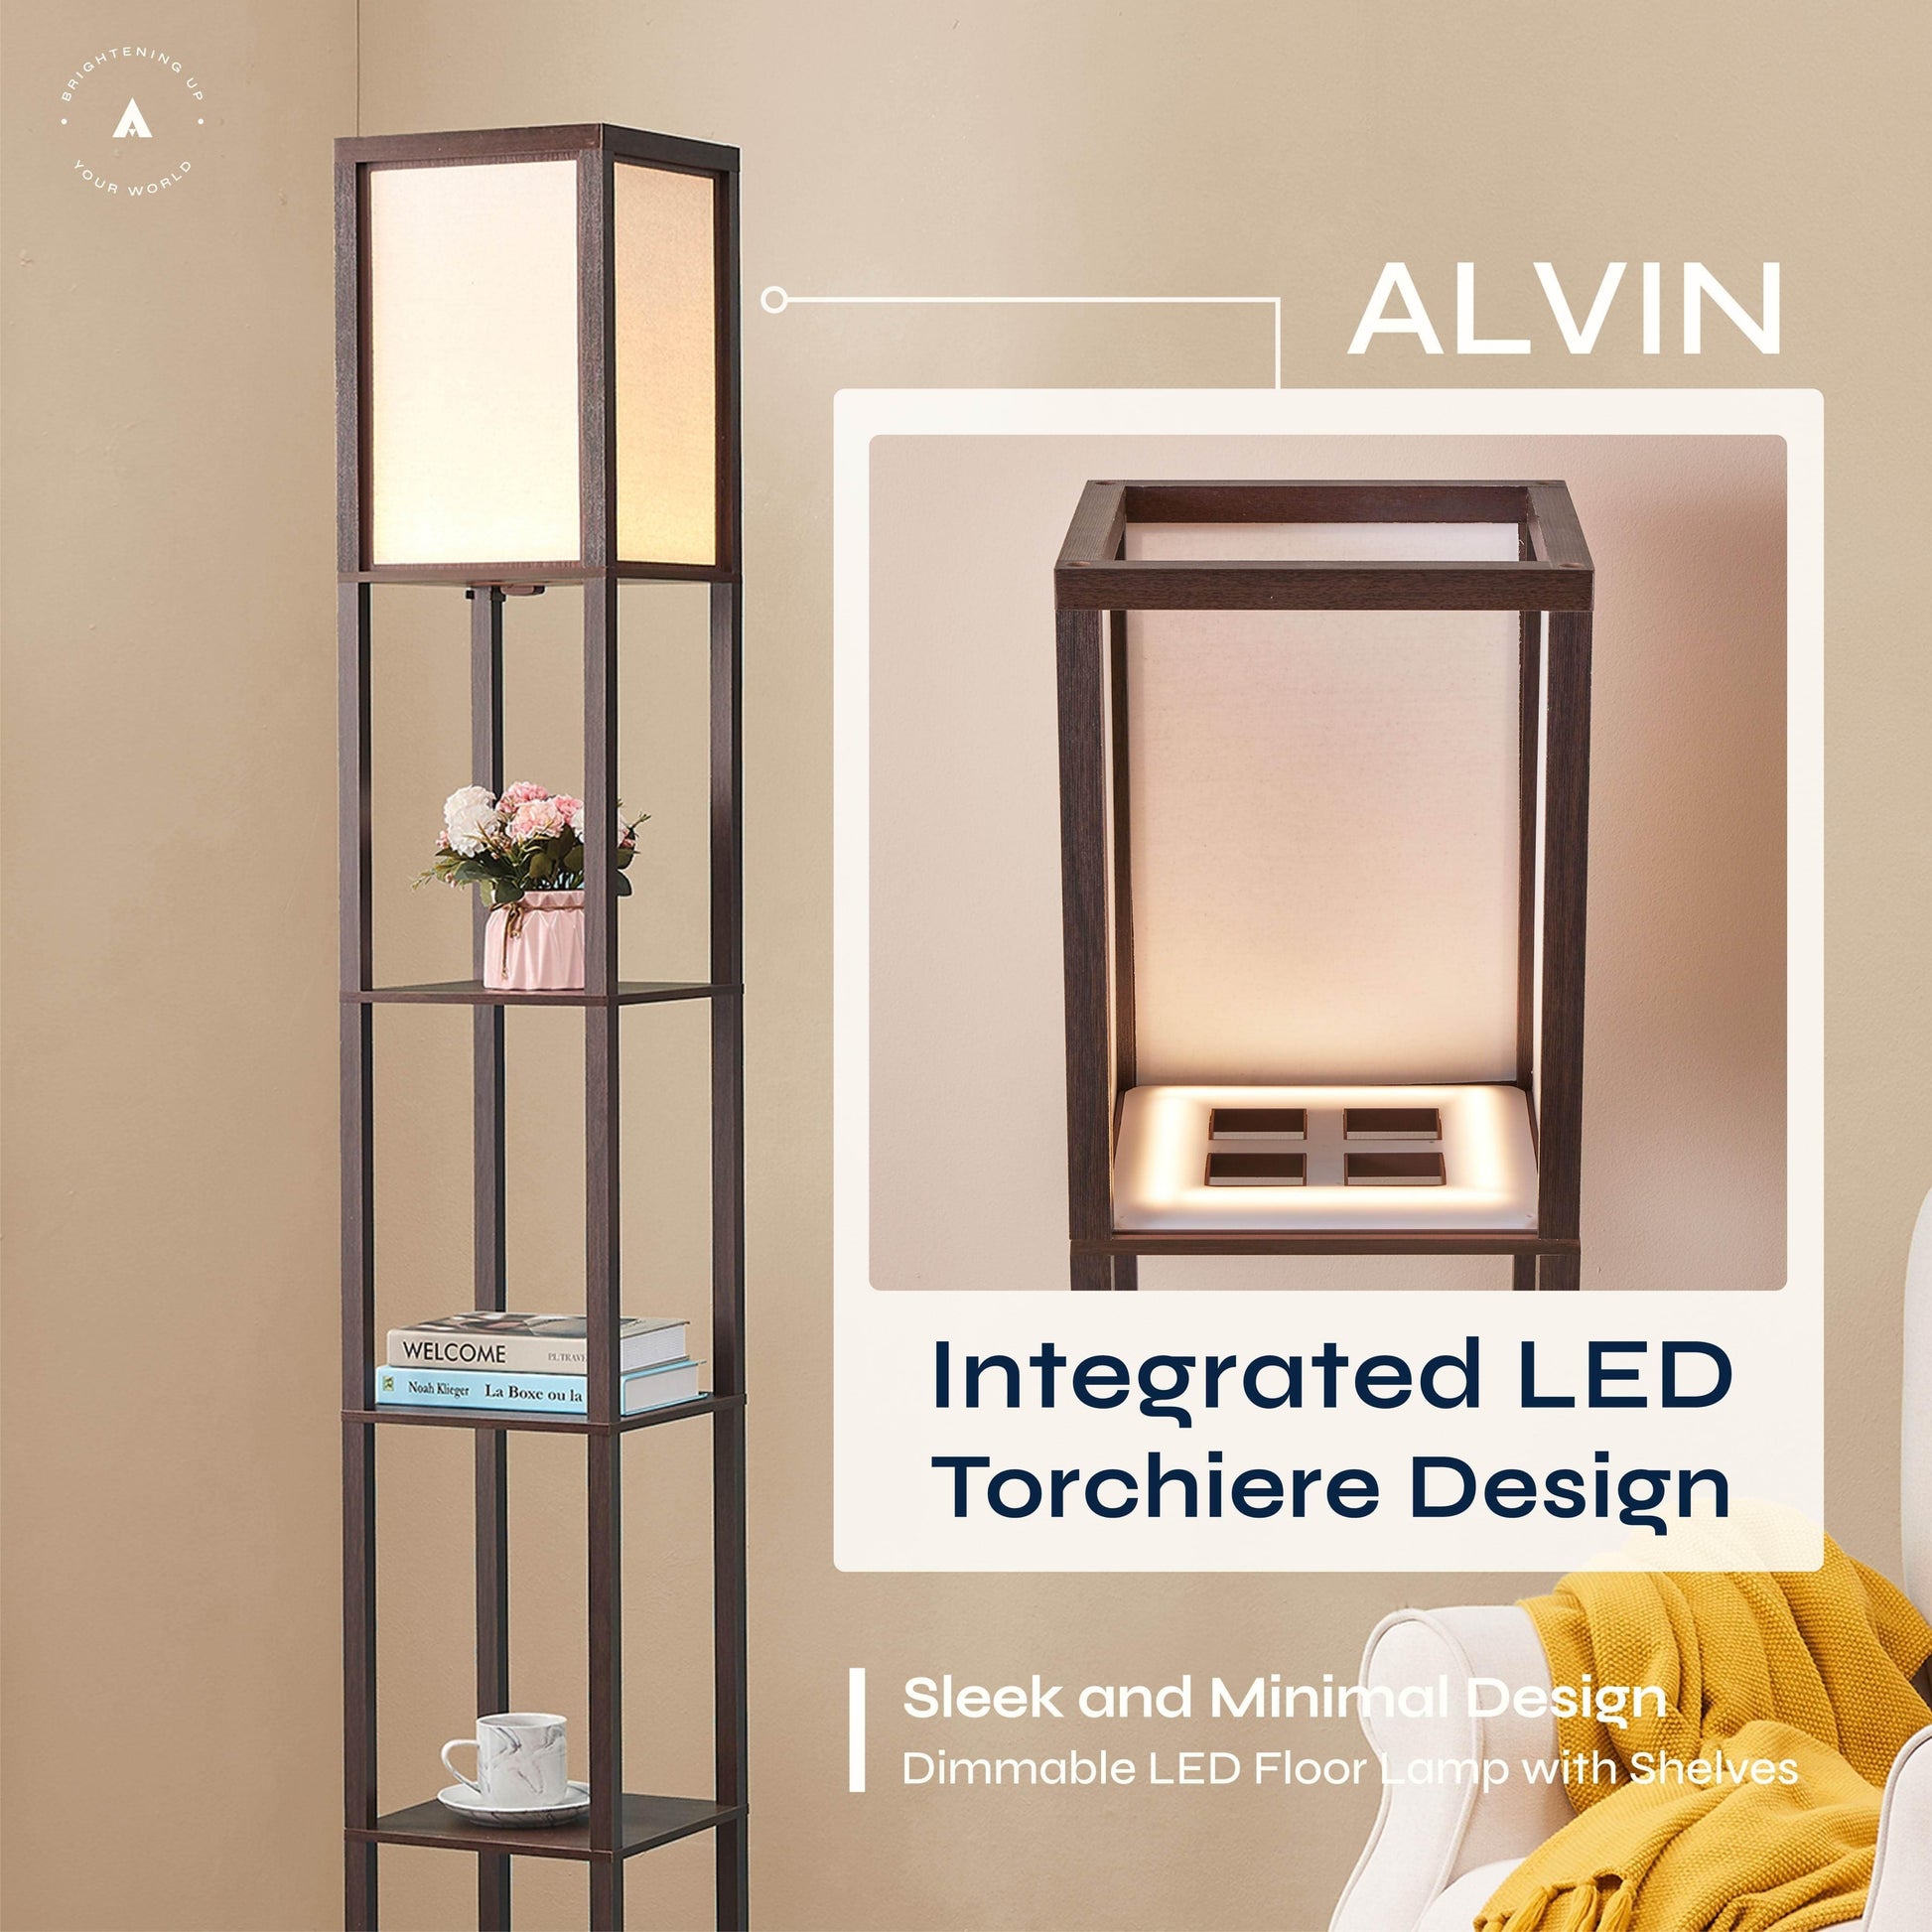 ATAMIN Alvin Dimmable Floor Lamp With Shelves & Integrated LED Lighting